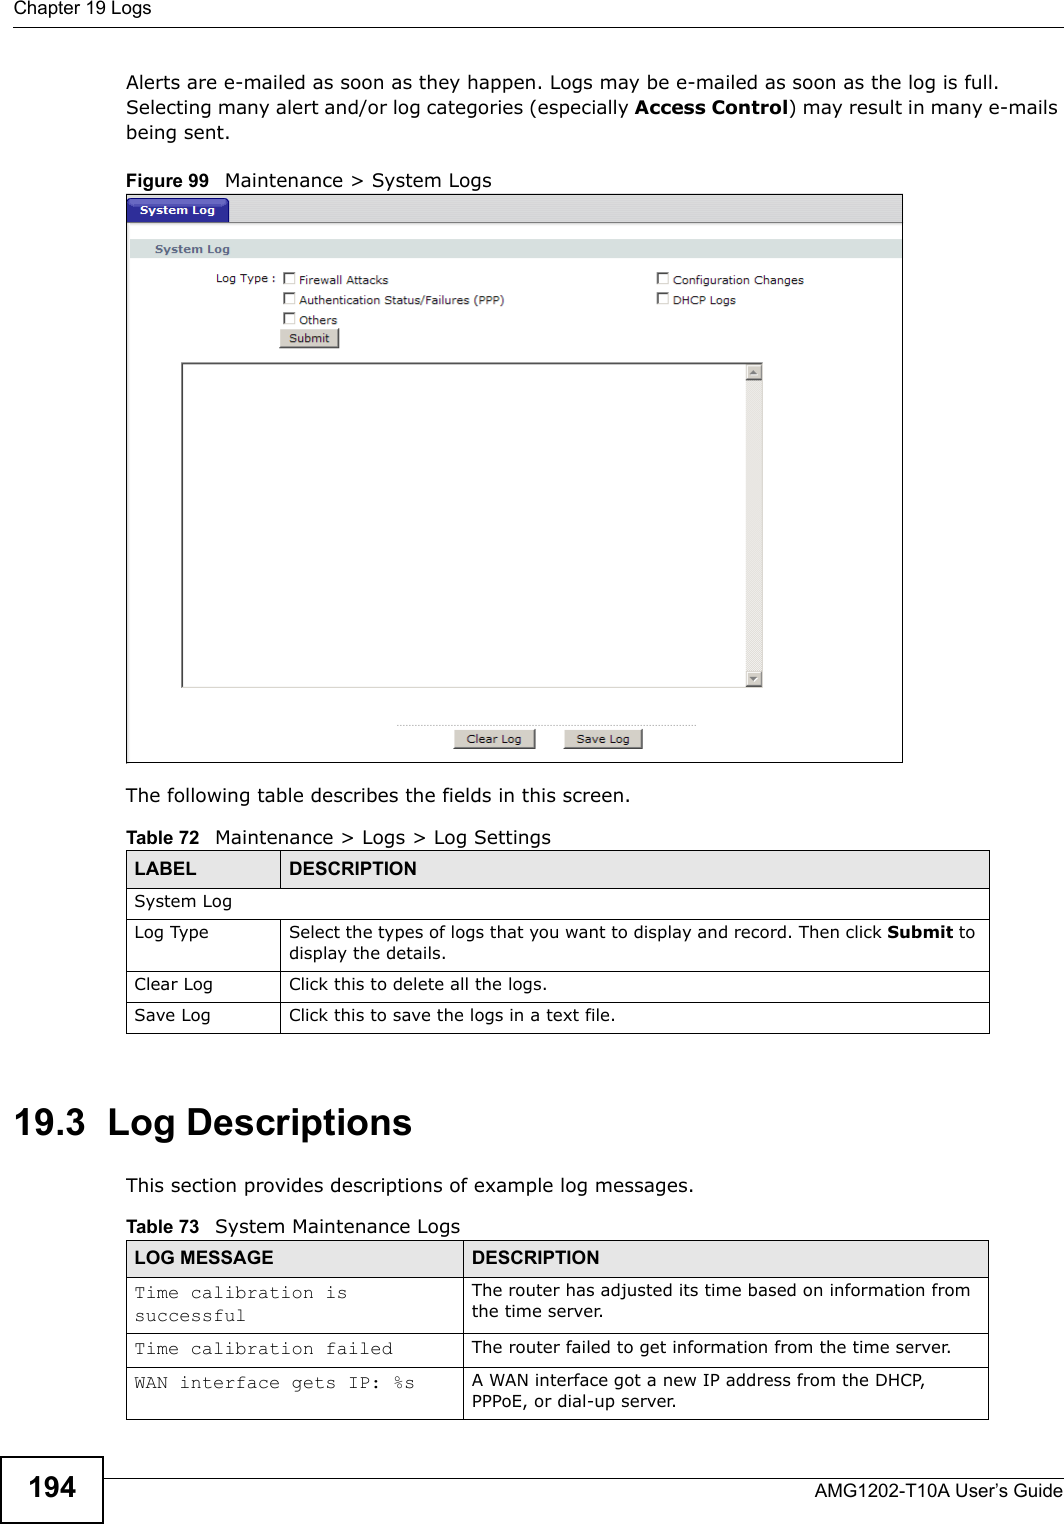 Chapter 19 LogsAMG1202-T10A User’s Guide194Alerts are e-mailed as soon as they happen. Logs may be e-mailed as soon as the log is full. Selecting many alert and/or log categories (especially Access Control) may result in many e-mails being sent.Figure 99   Maintenance &gt; System LogsThe following table describes the fields in this screen. 19.3  Log DescriptionsThis section provides descriptions of example log messages. Table 72   Maintenance &gt; Logs &gt; Log SettingsLABEL DESCRIPTIONSystem LogLog Type Select the types of logs that you want to display and record. Then click Submit to display the details.Clear Log Click this to delete all the logs.  Save Log Click this to save the logs in a text file.Table 73   System Maintenance LogsLOG MESSAGE DESCRIPTIONTime calibration is successfulThe router has adjusted its time based on information from the time server.Time calibration failed The router failed to get information from the time server.WAN interface gets IP: %s A WAN interface got a new IP address from the DHCP, PPPoE, or dial-up server.